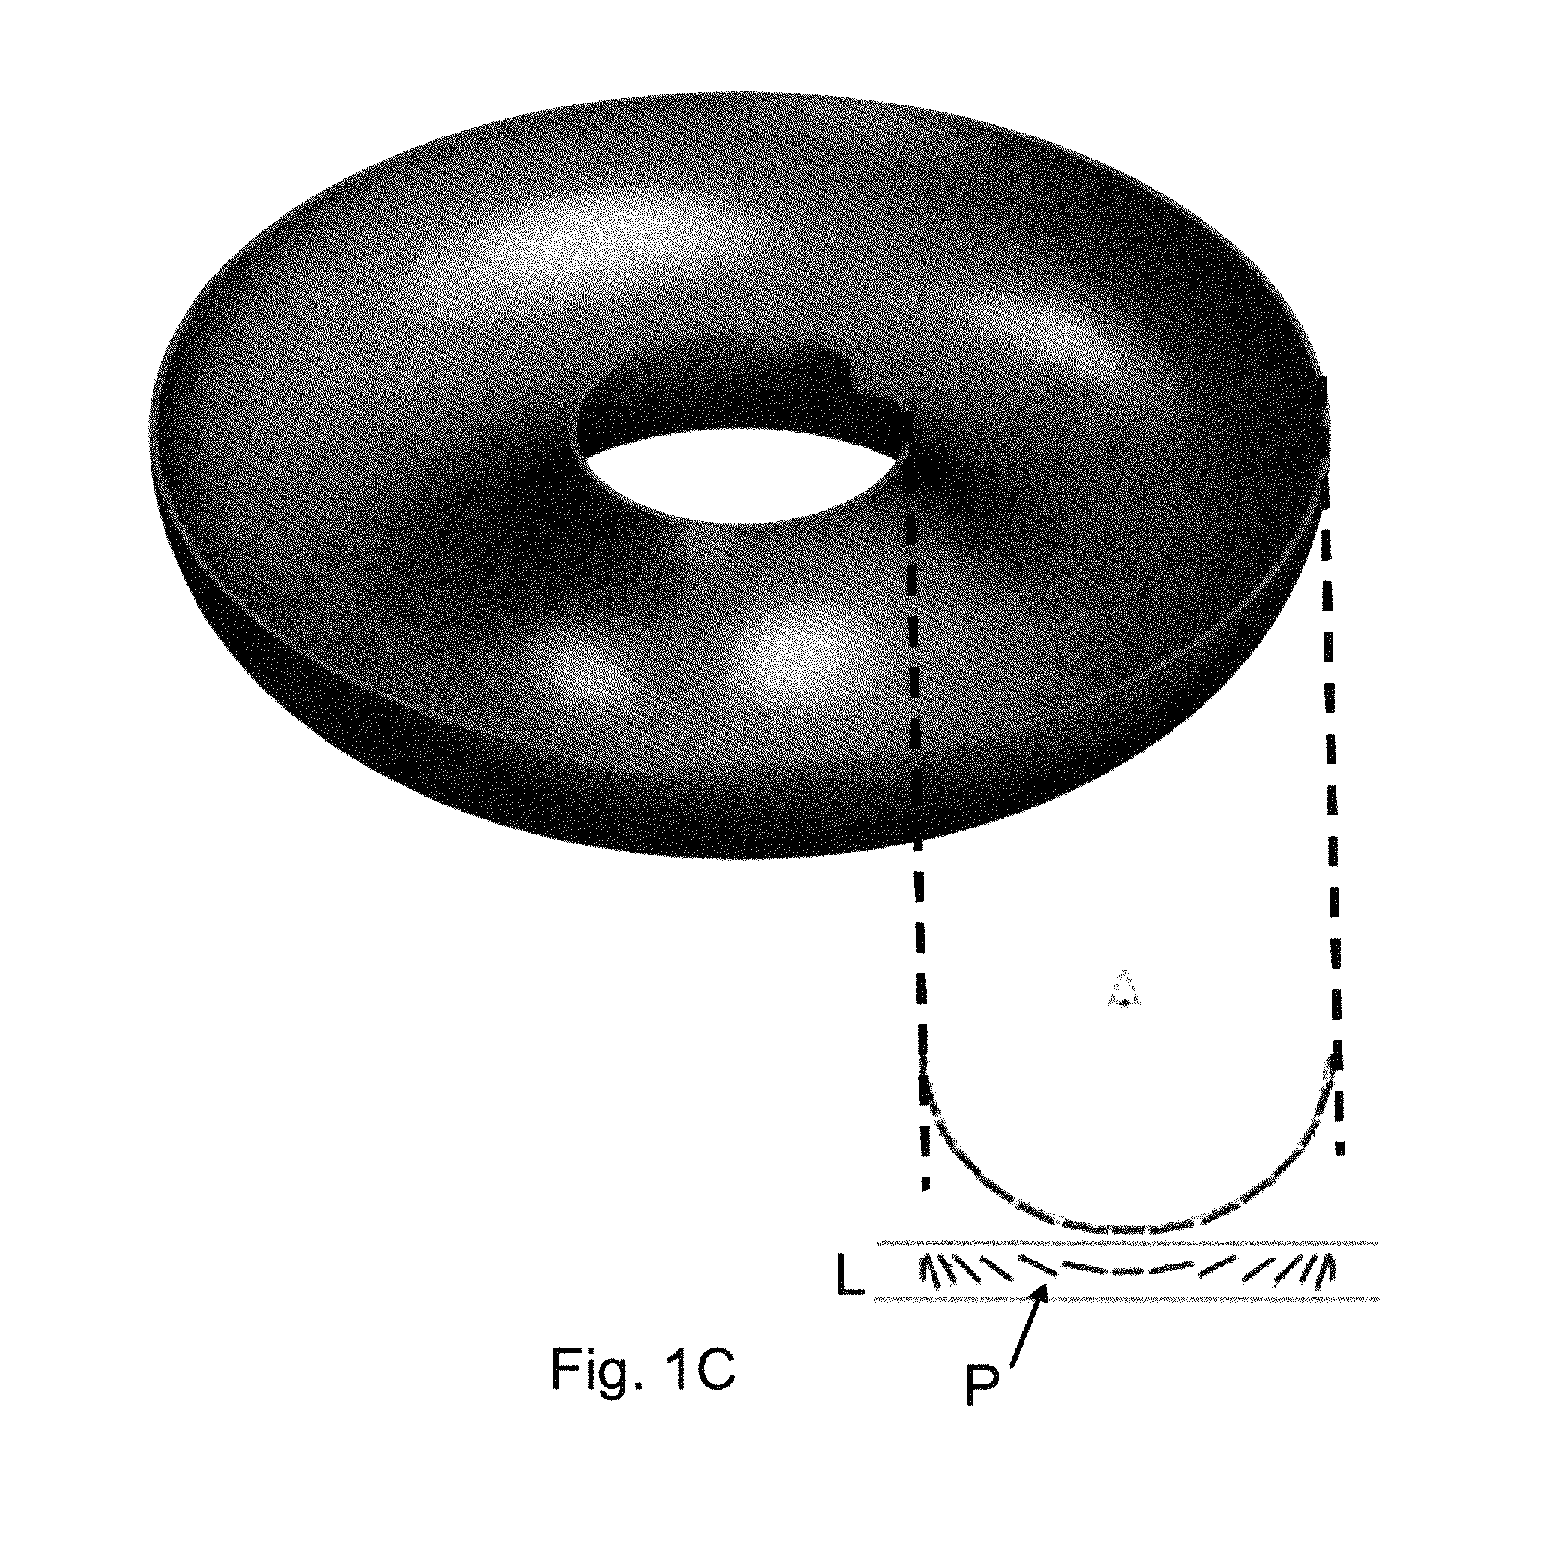 Optical effect layers showing a viewing angle dependent optical effect, processes and devices for their production, items carrying an optical effect layer, and uses thereof